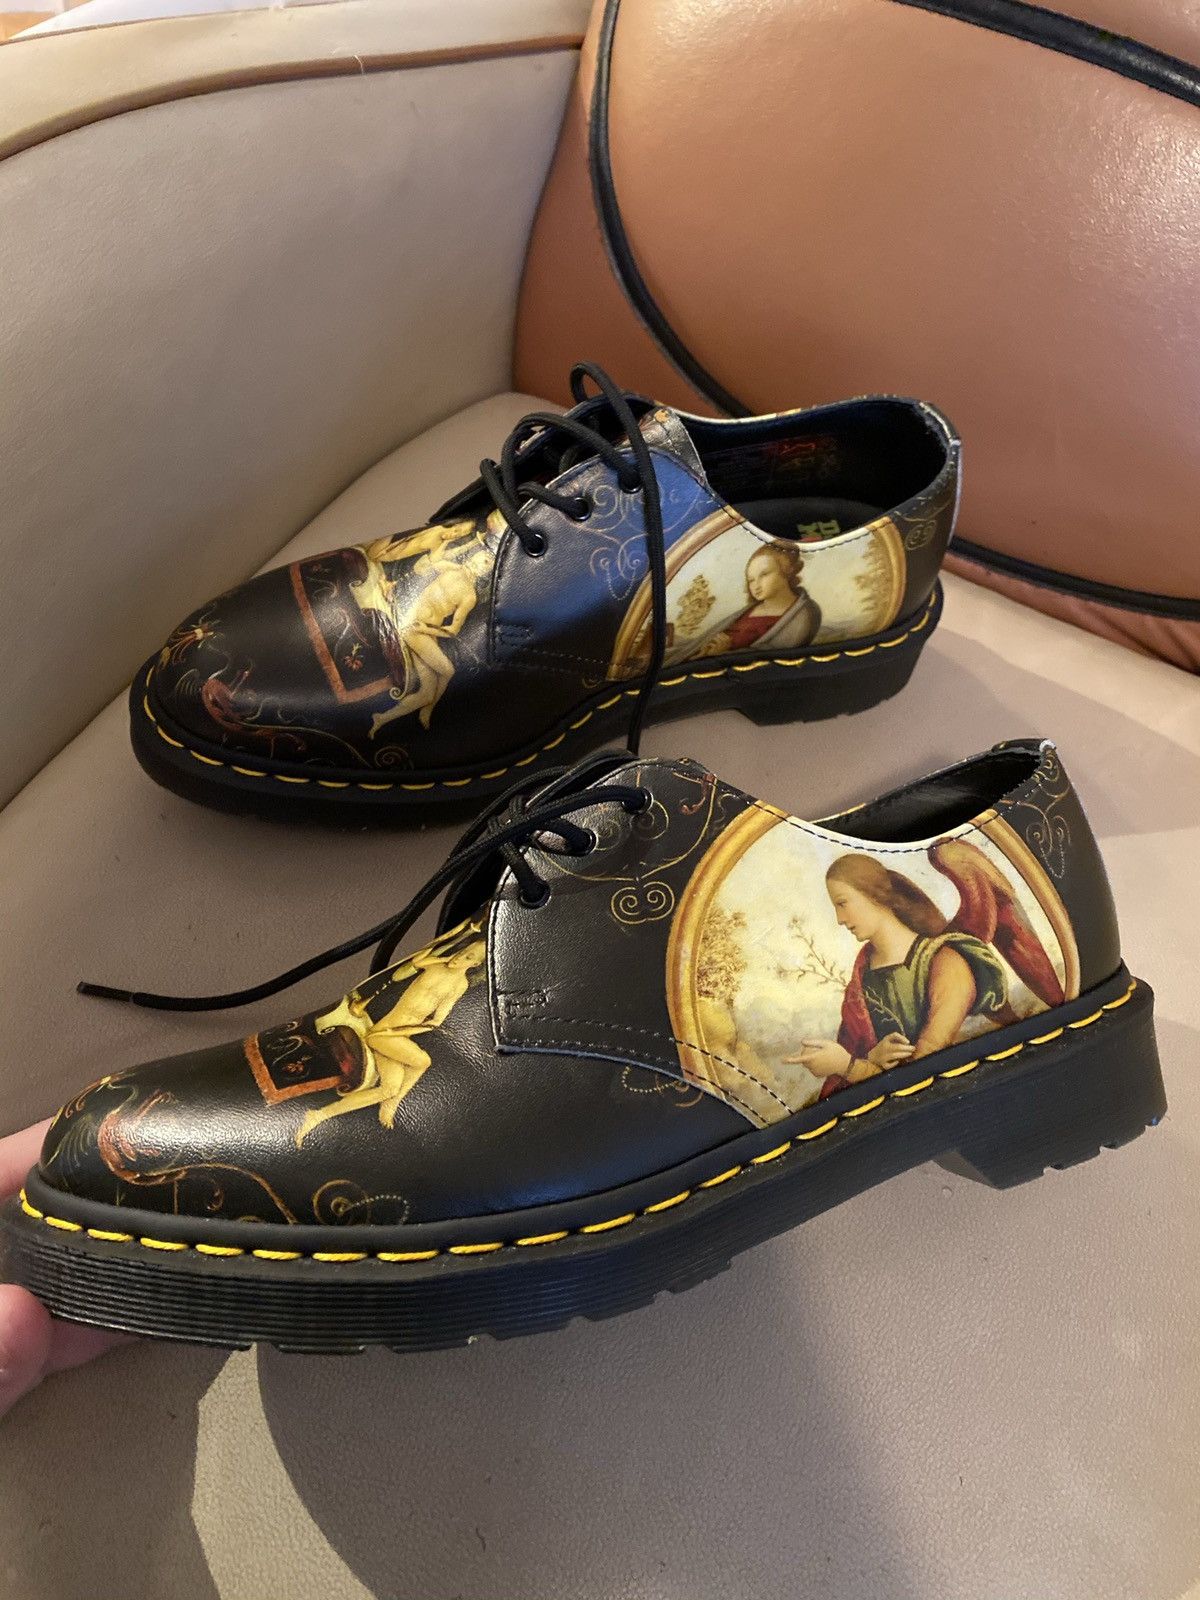 Dr. Martens Doc Martens 1461 Di Paolo Backhand!! | Grailed